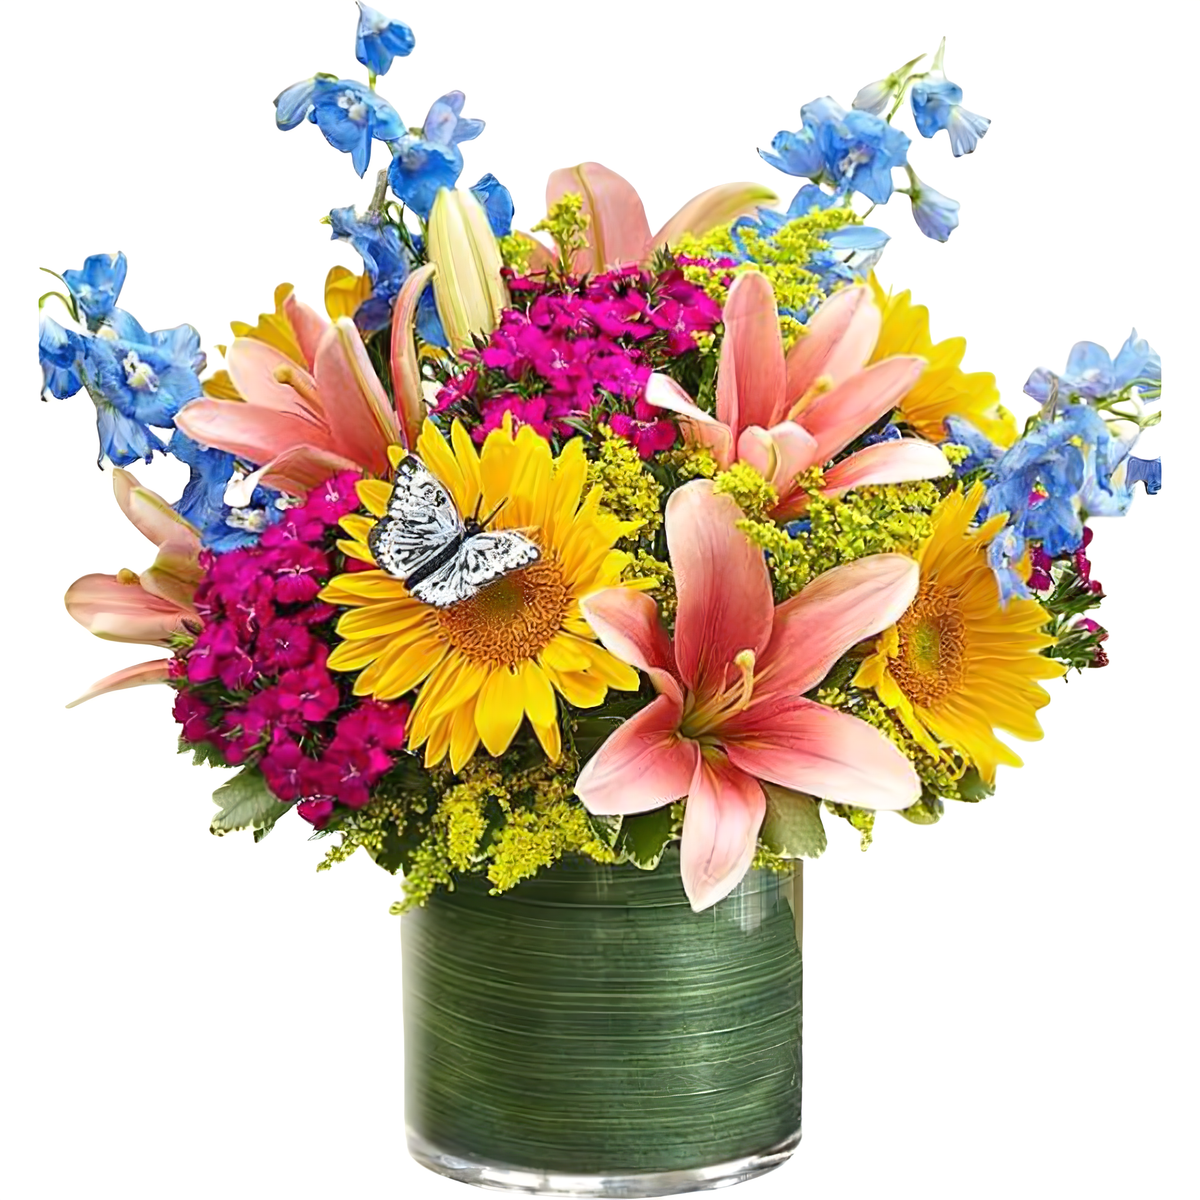 Manhattan Flower Delivery - Simply Sophisticated - Birthdays